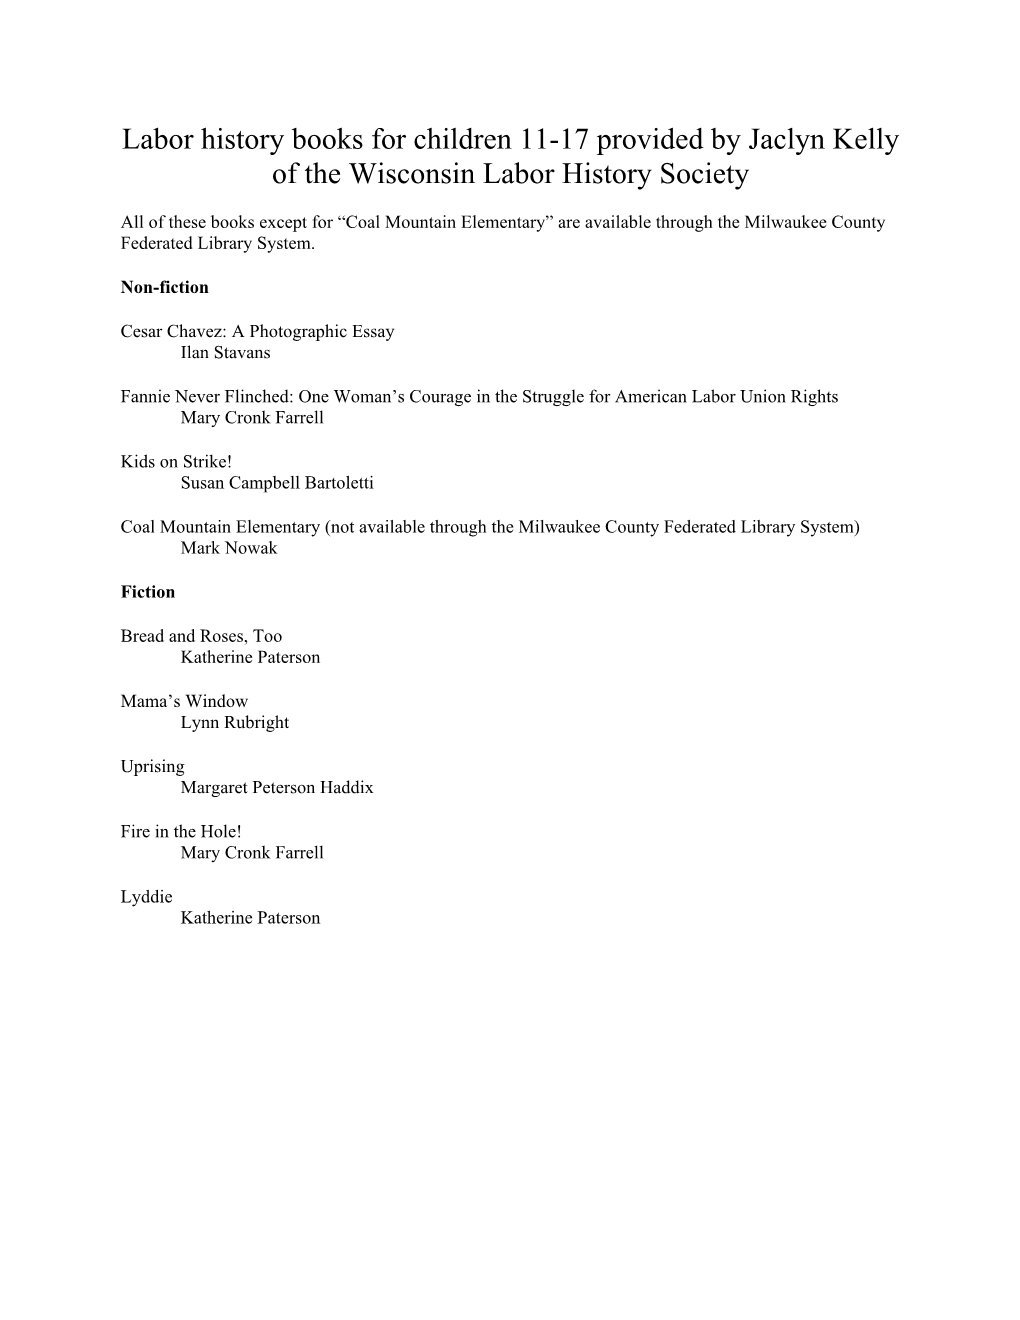 Labor History Books for Children 11-17 Provided by Jaclyn Kelly of the Wisconsin Labor History Society